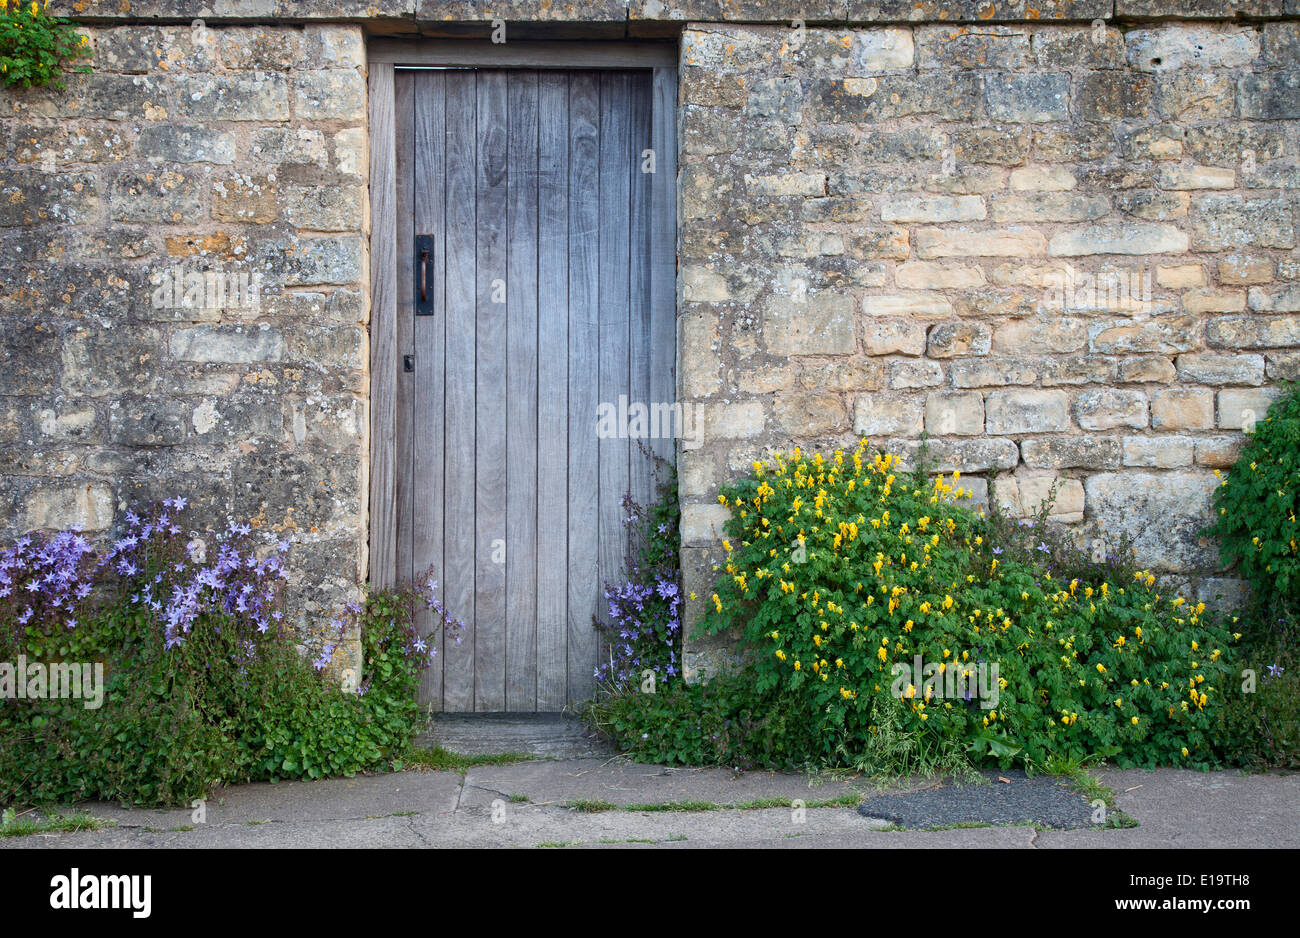 Garden wall with wooden door and flowers, Cotswolds, Chipping Campden, Gloucestershire, England. Stock Photo